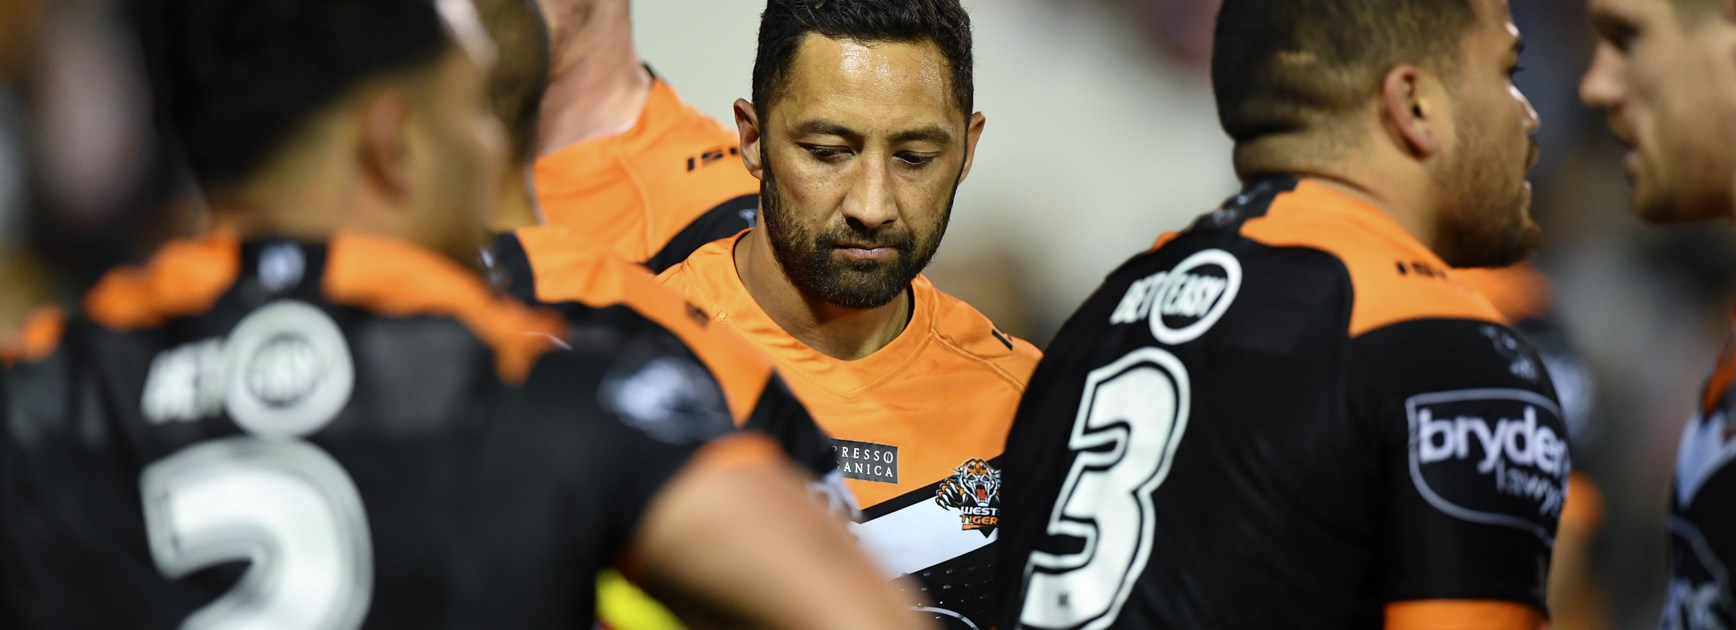 Wests Tigers five-eighth Benji Marshall.